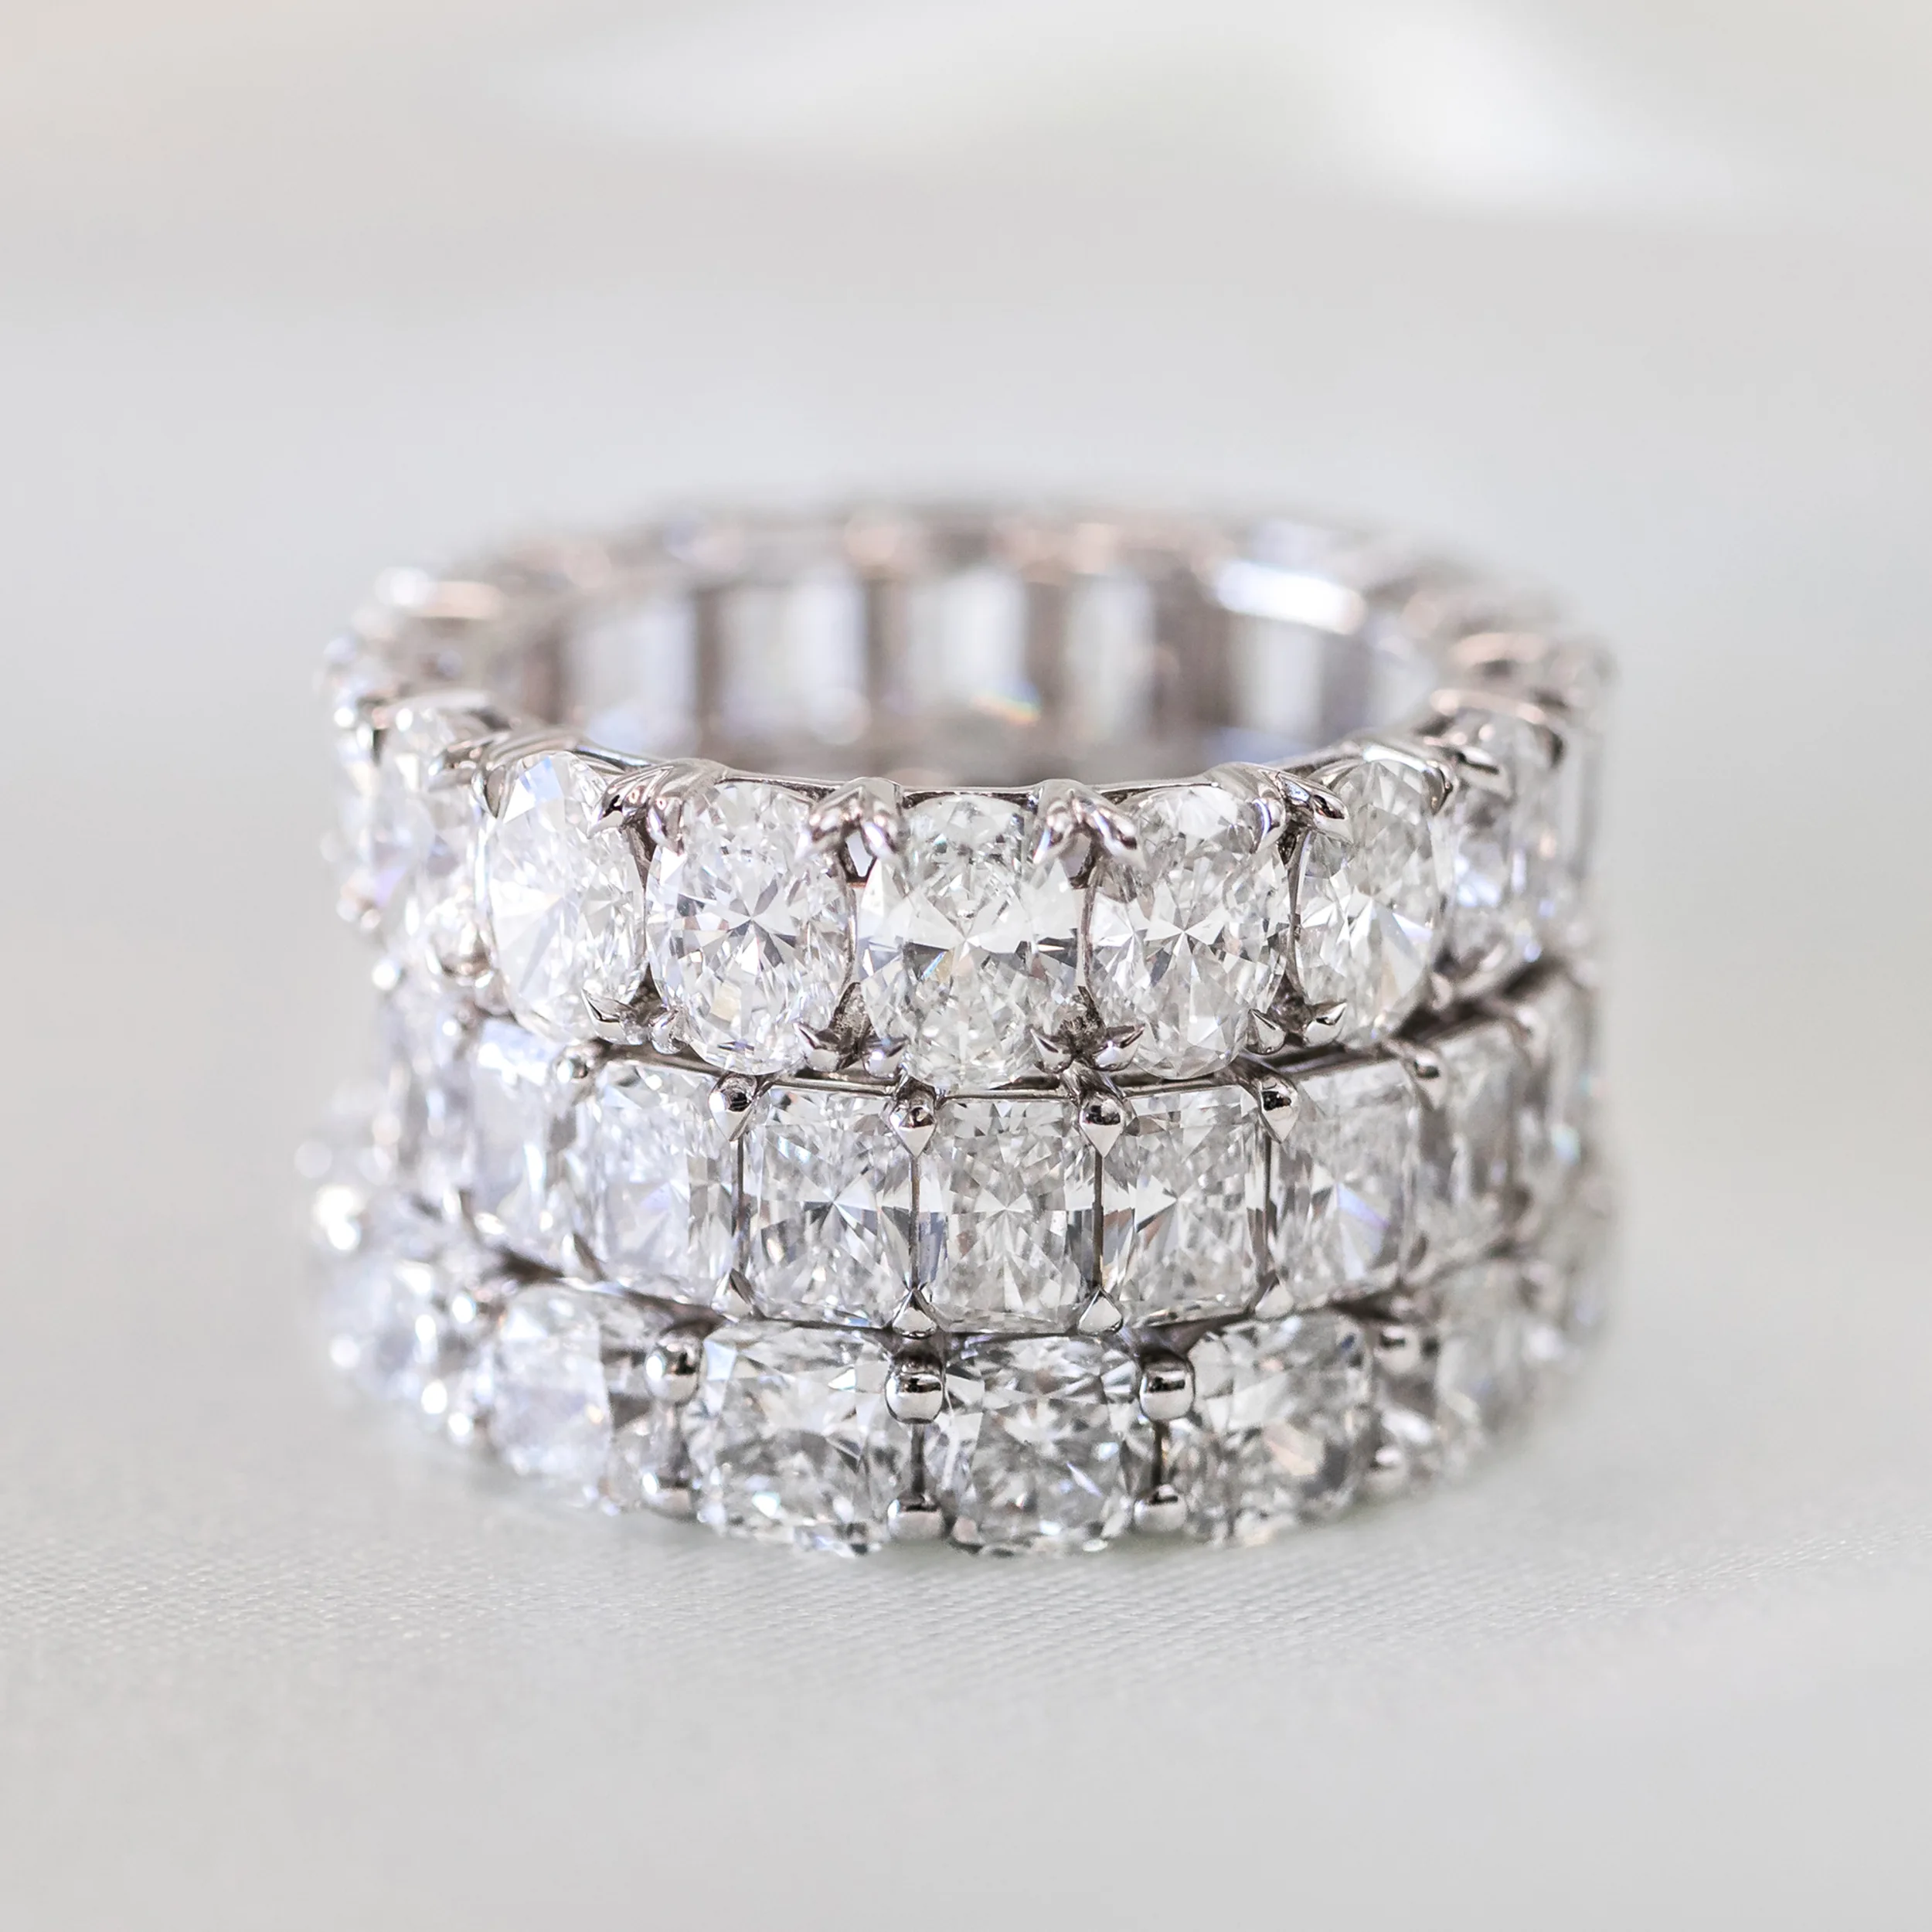 Oval Diamond French U Eternity Band featuring High Quality Synthetic Diamonds